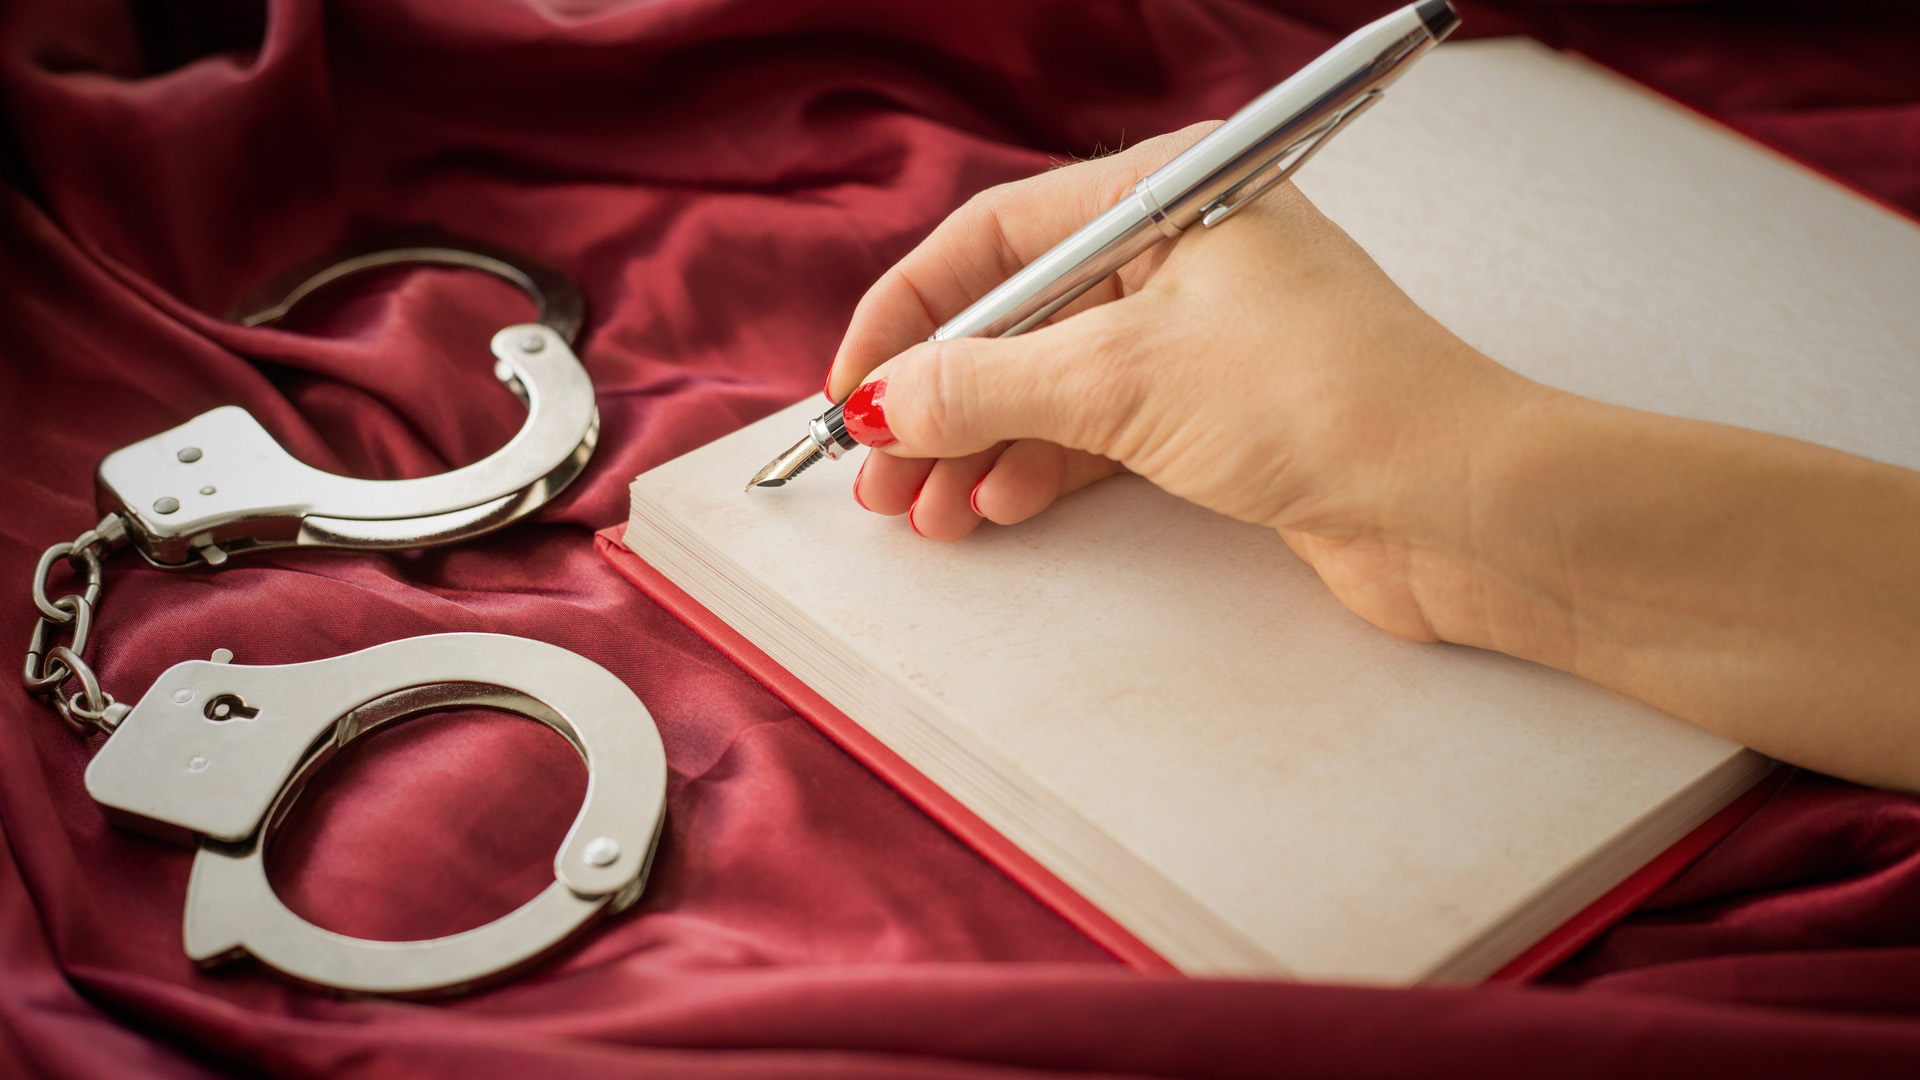 Hand of a woman holding a pen and writing on a text book with silver handcuffs next to it. Red silk background.